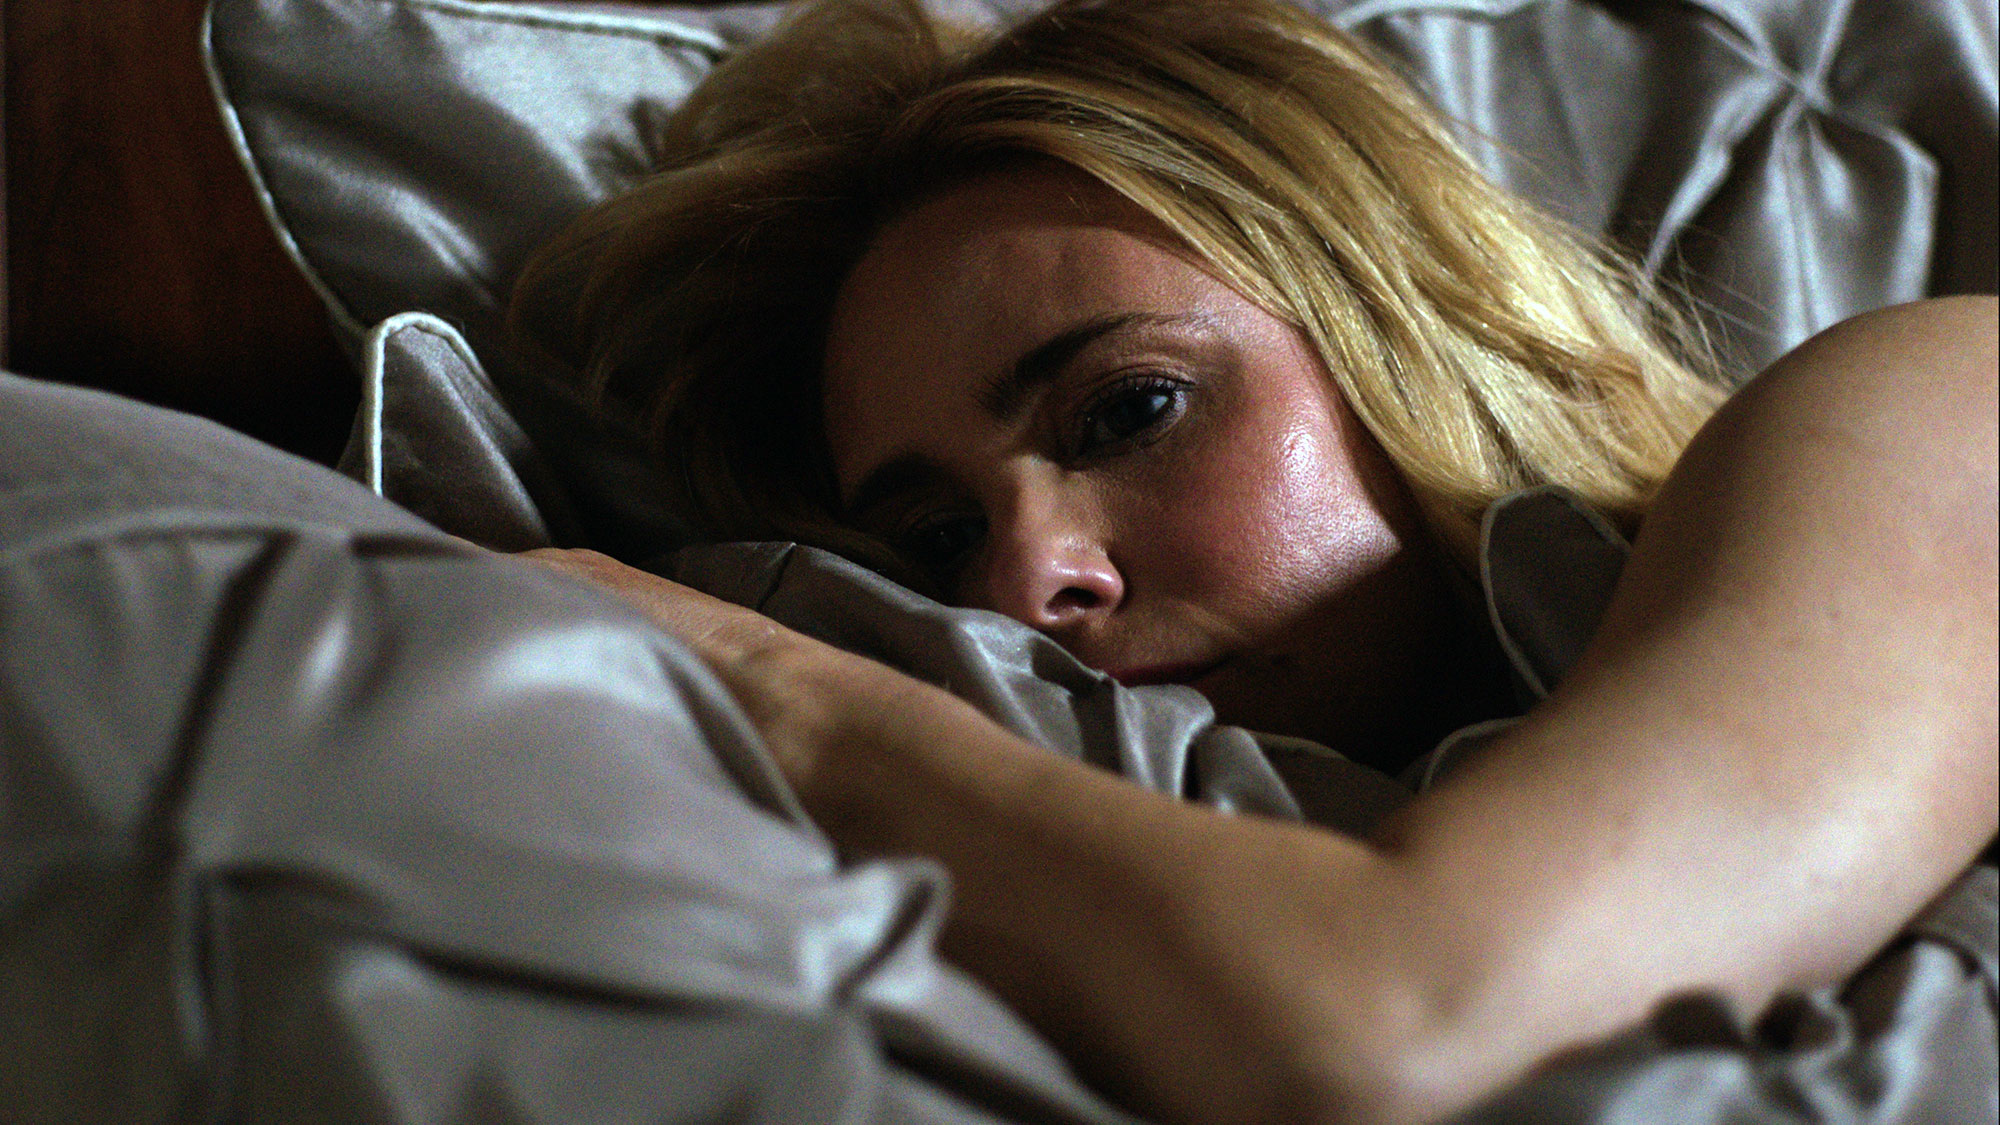 Olivia d’Abo as Sarah in "THE WRONG SON" Motion Picture. 